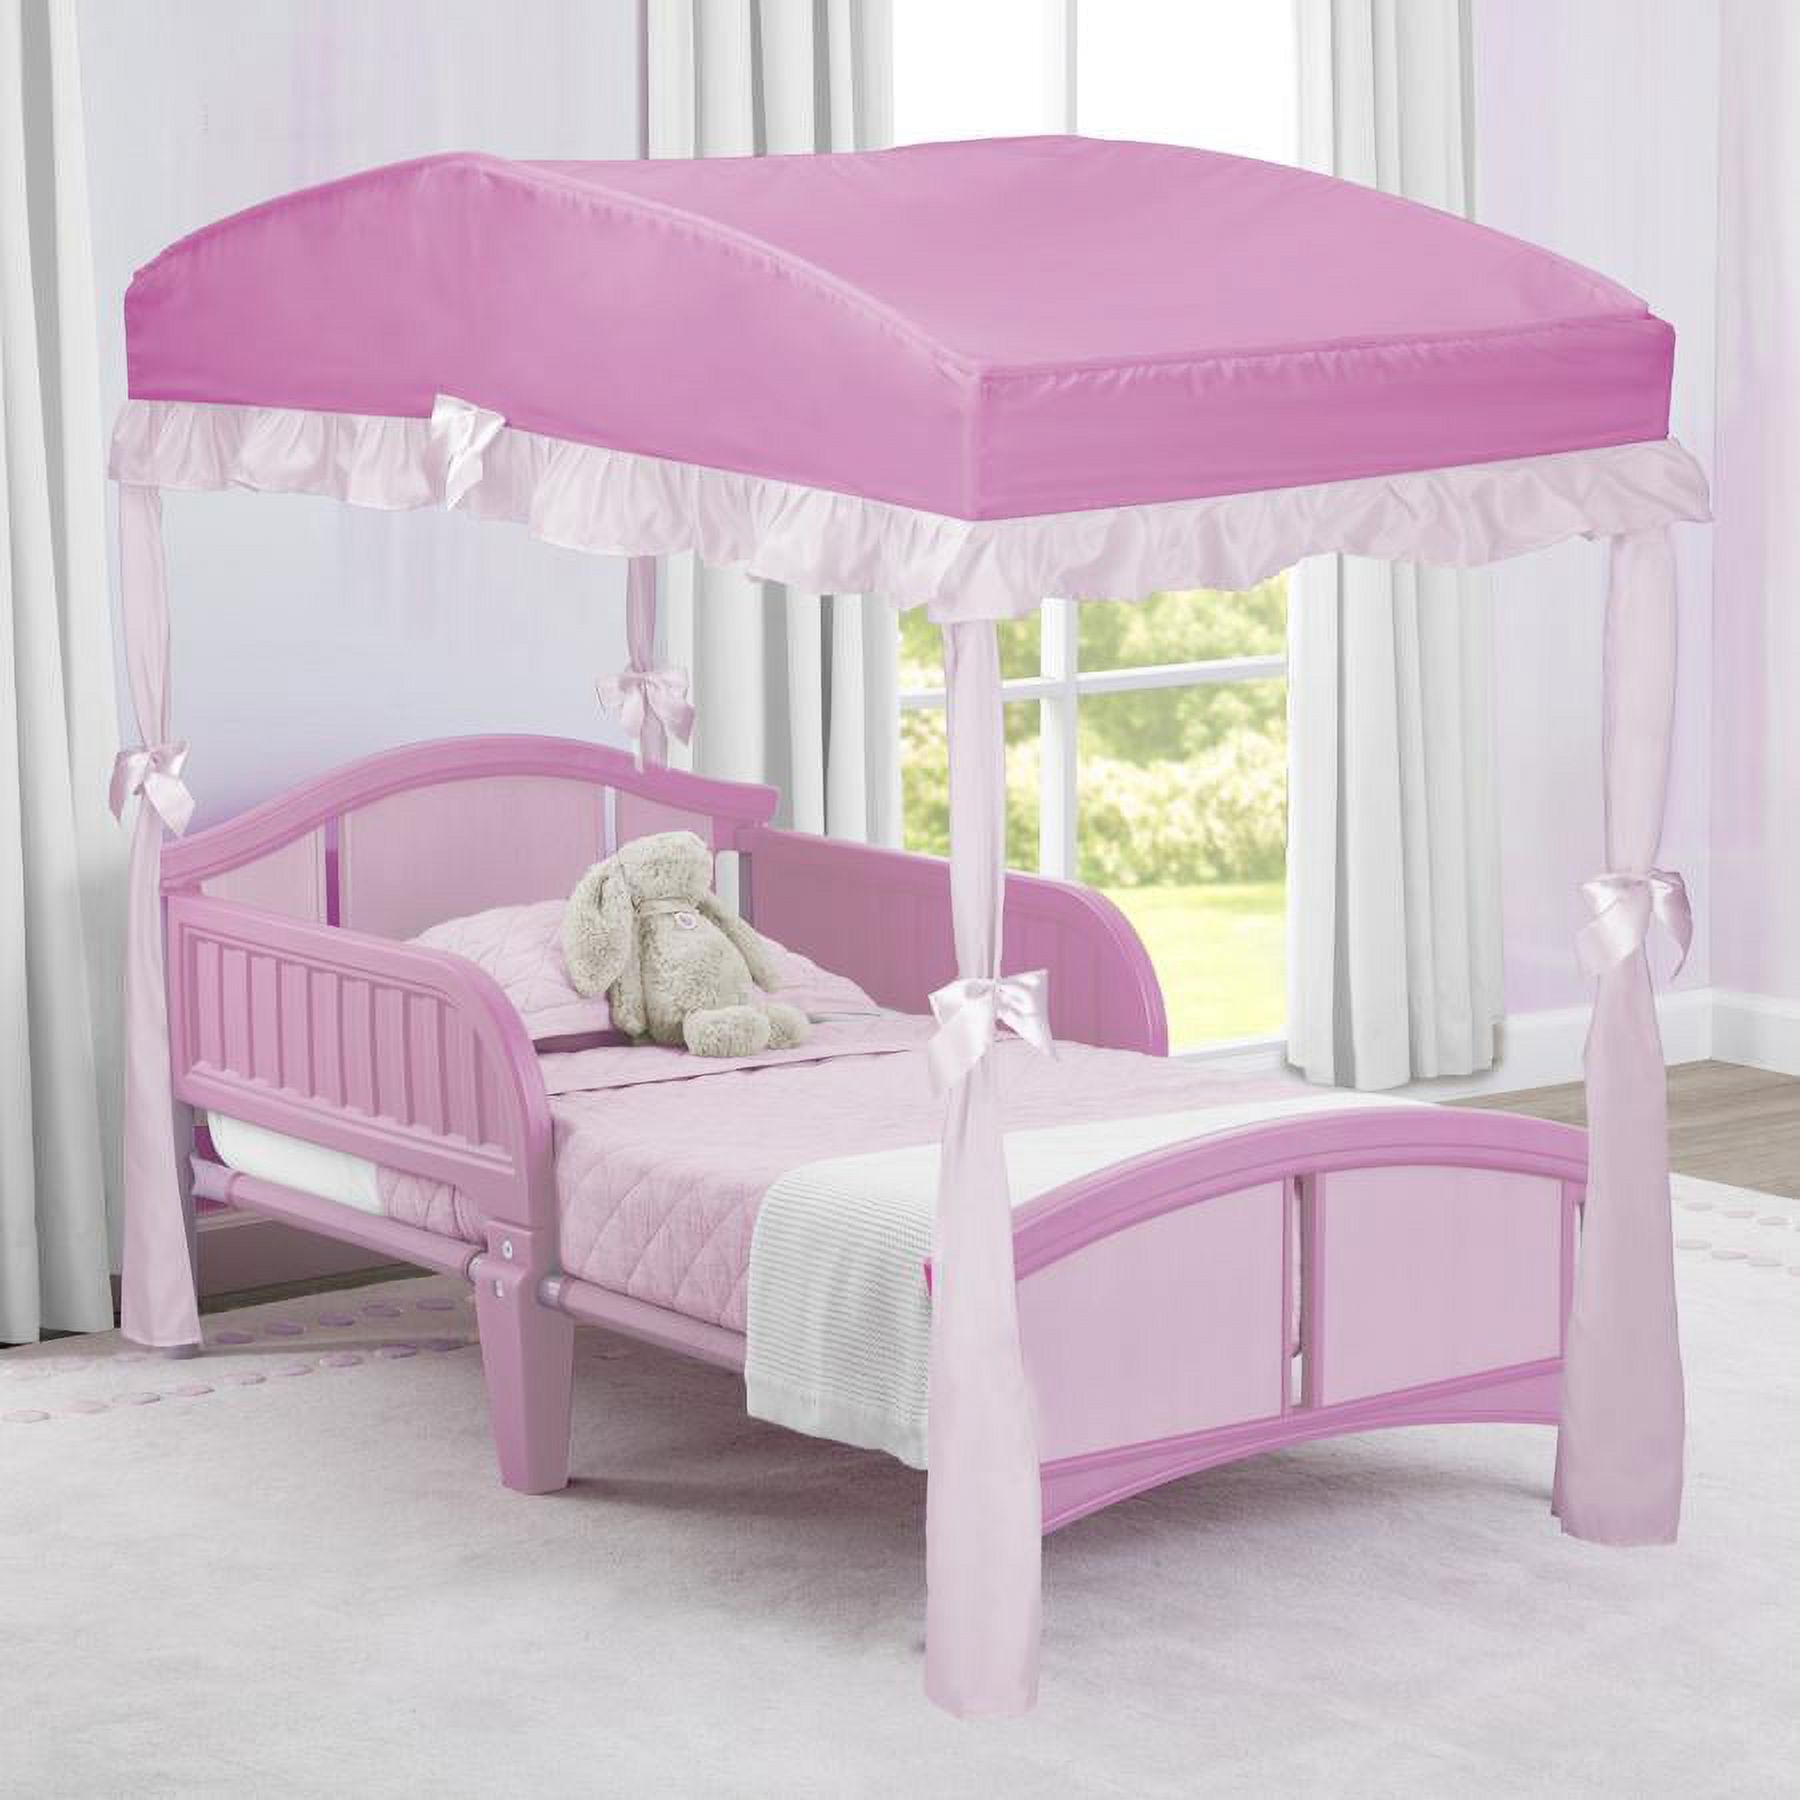 Delta Toddler Bed Canopy, Pink - image 5 of 7